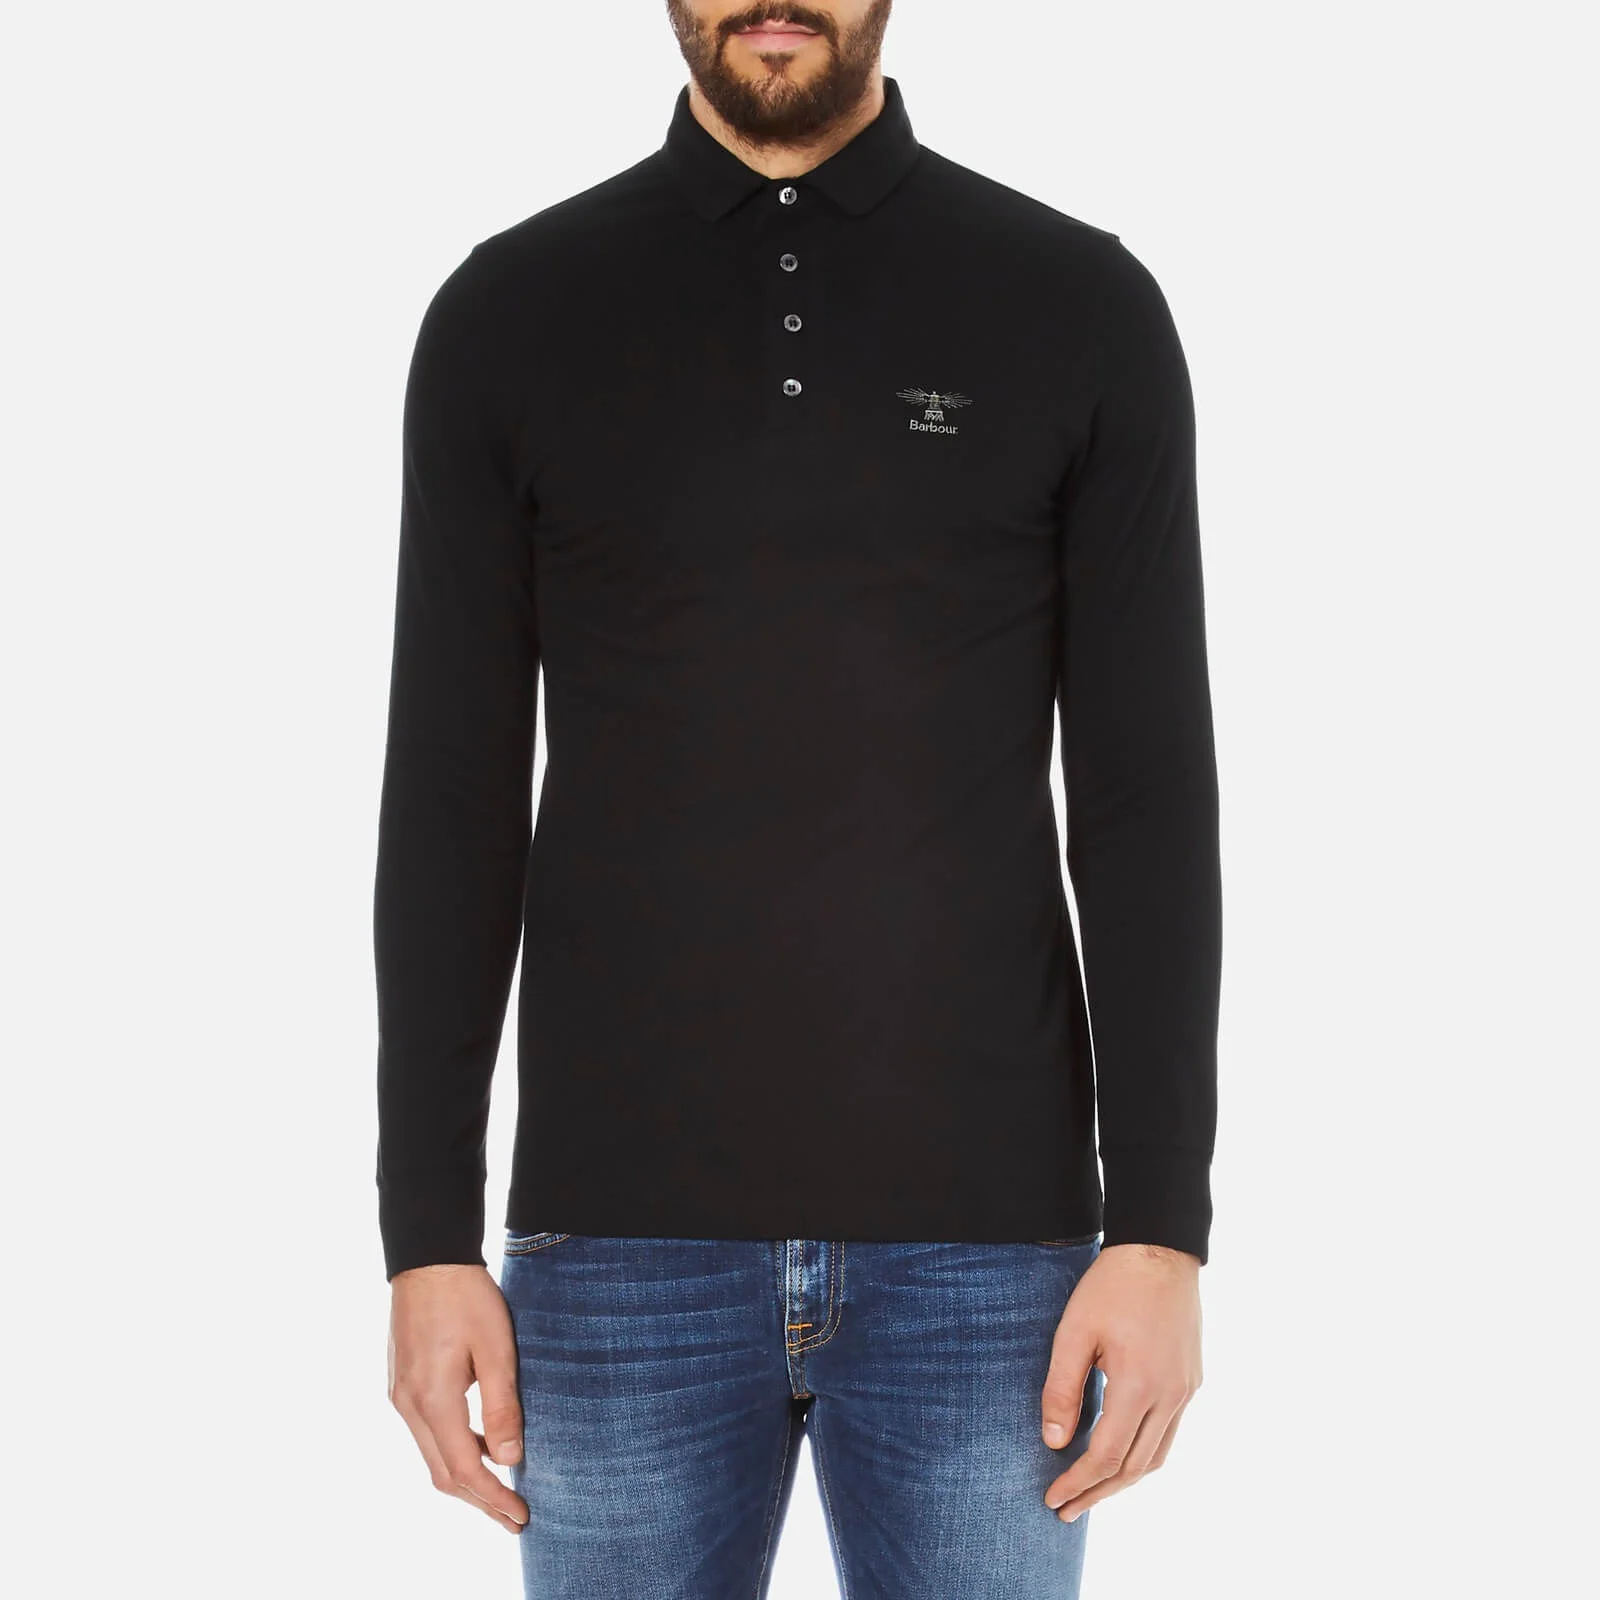 Barbour Men's Standards Long Sleeve Embroidered Polo Shirt - Black Image 1